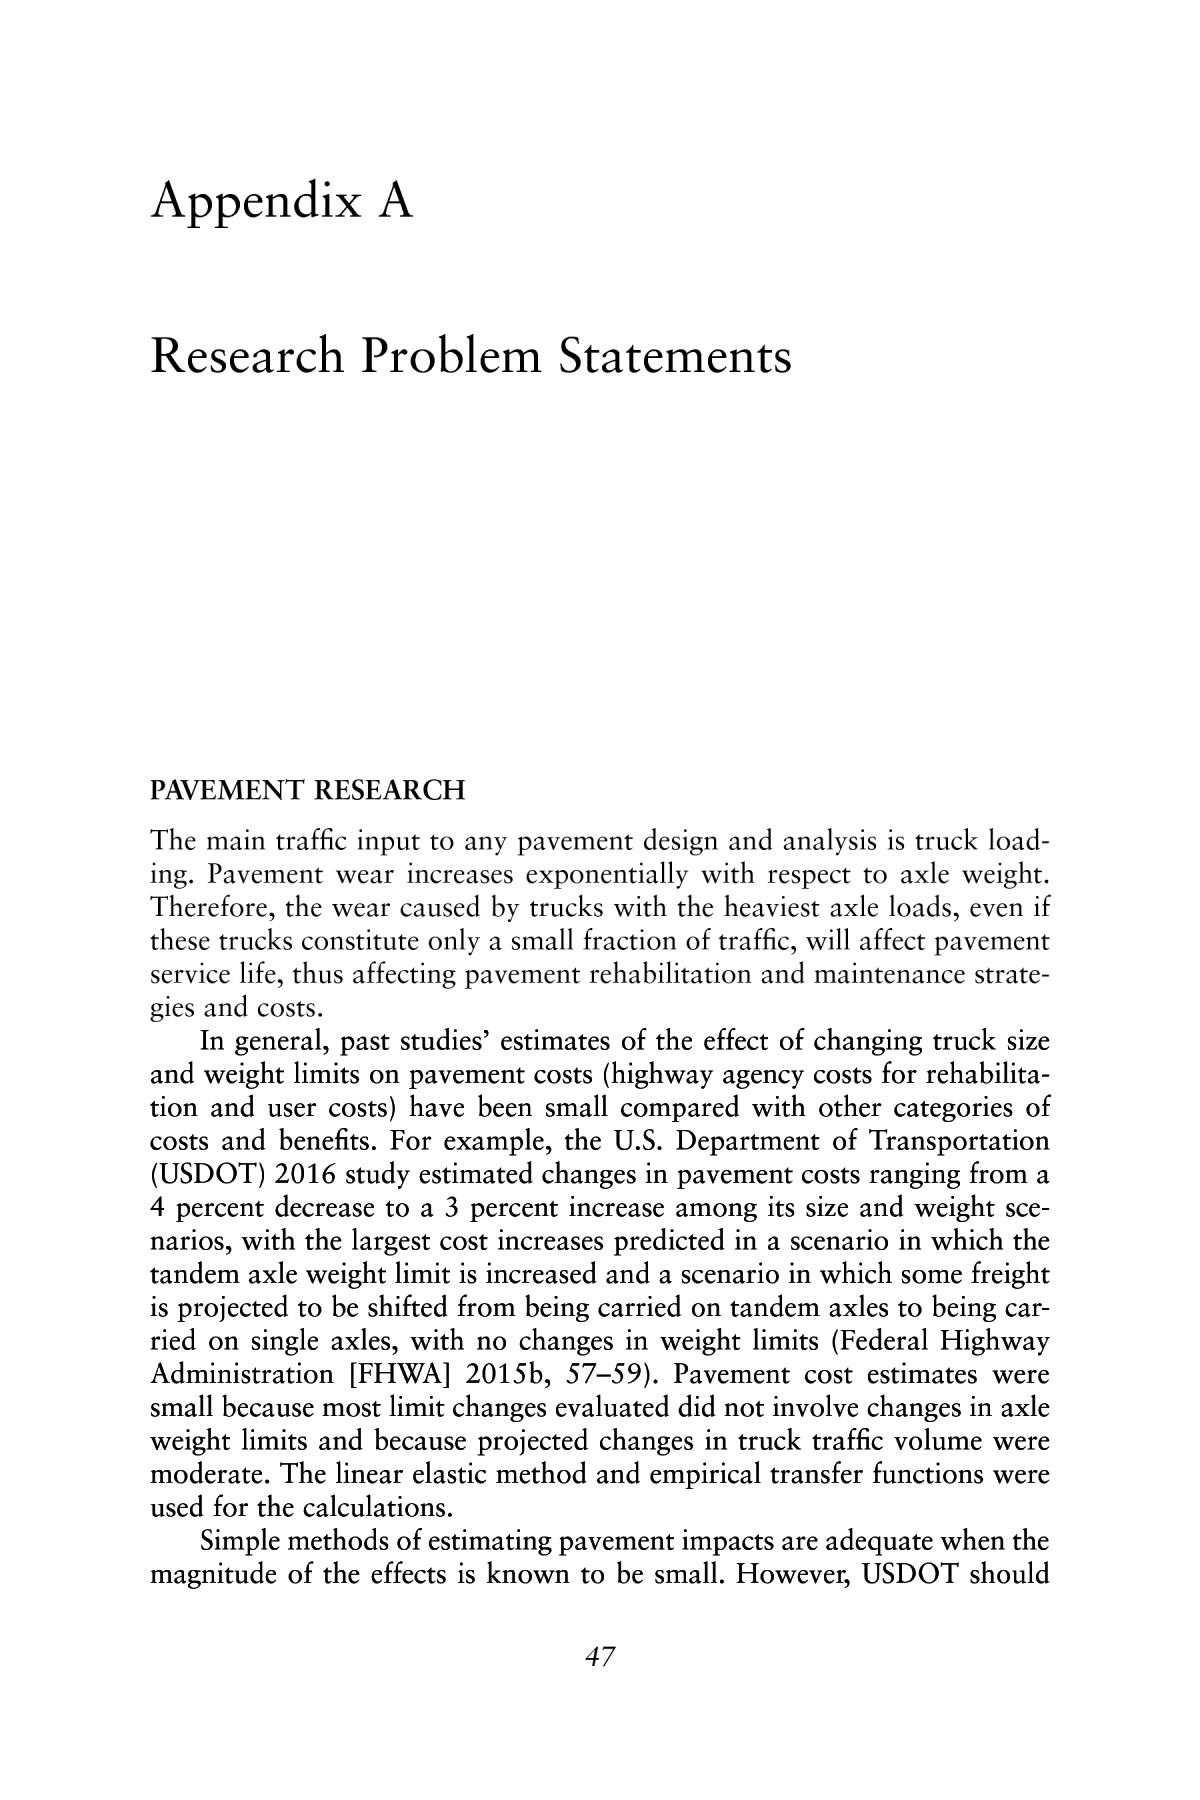 research problem statement for training and development